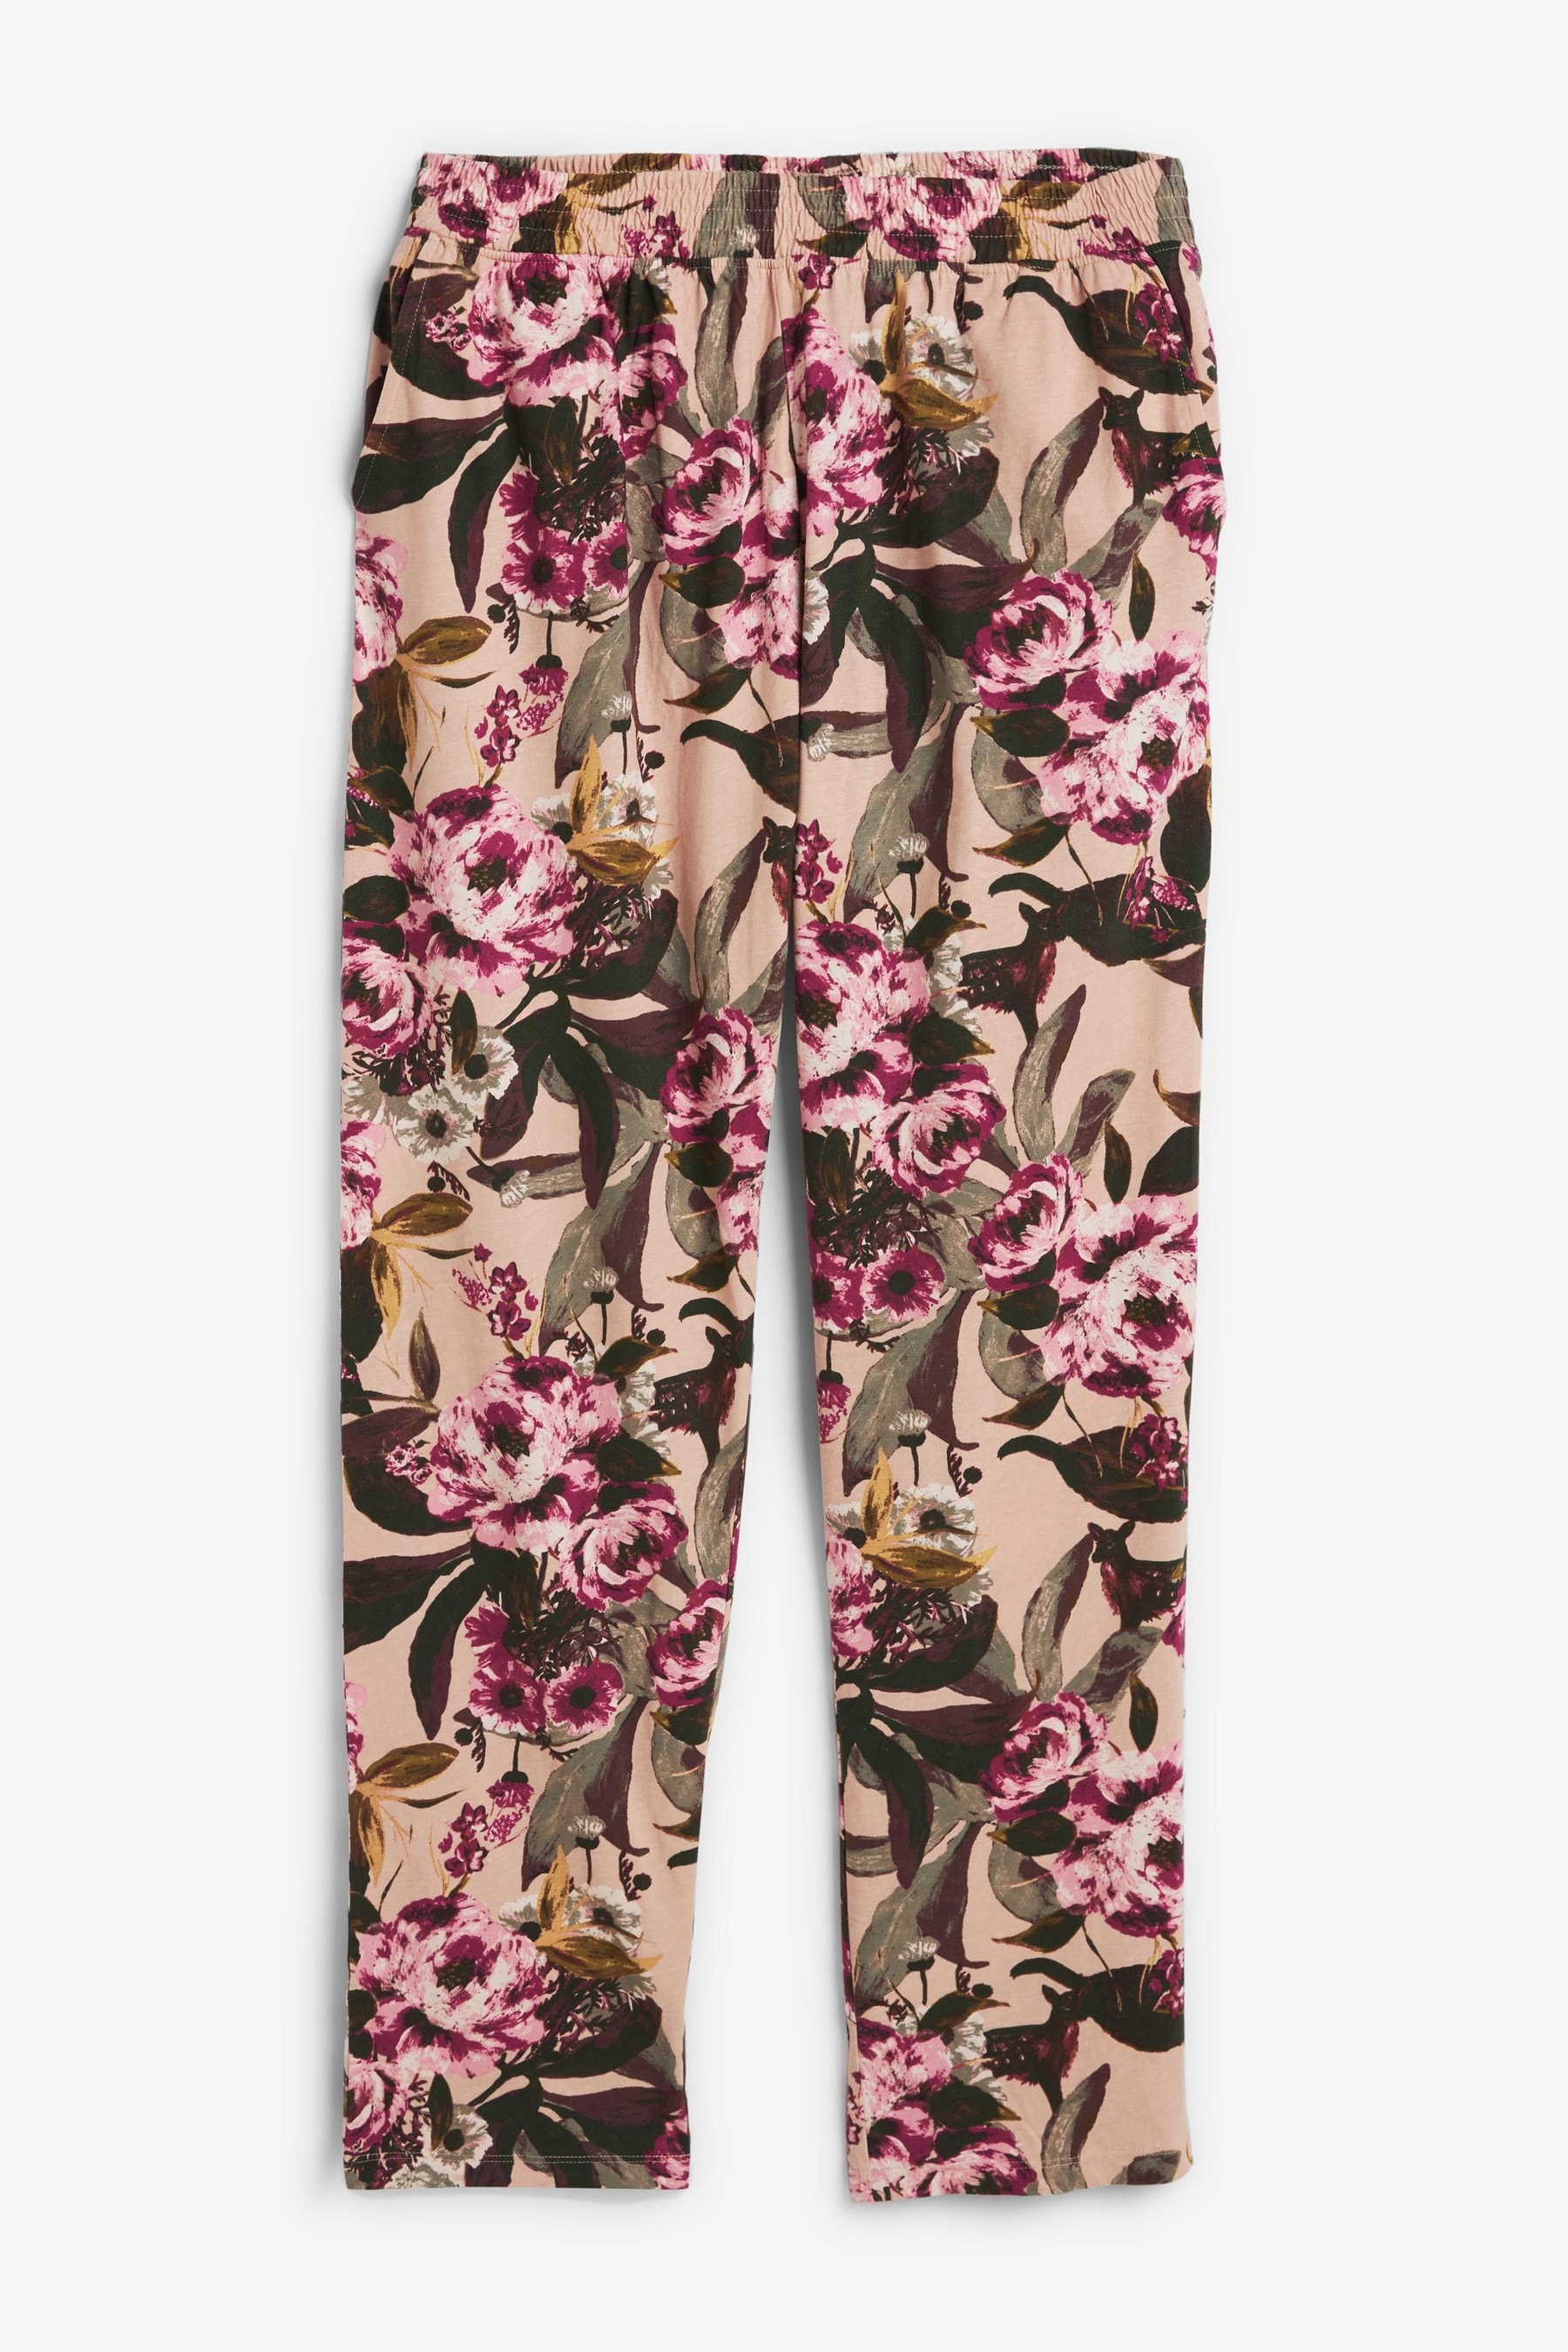 Buy Berry Floral Cotton Pyjamas from the Next UK online shop